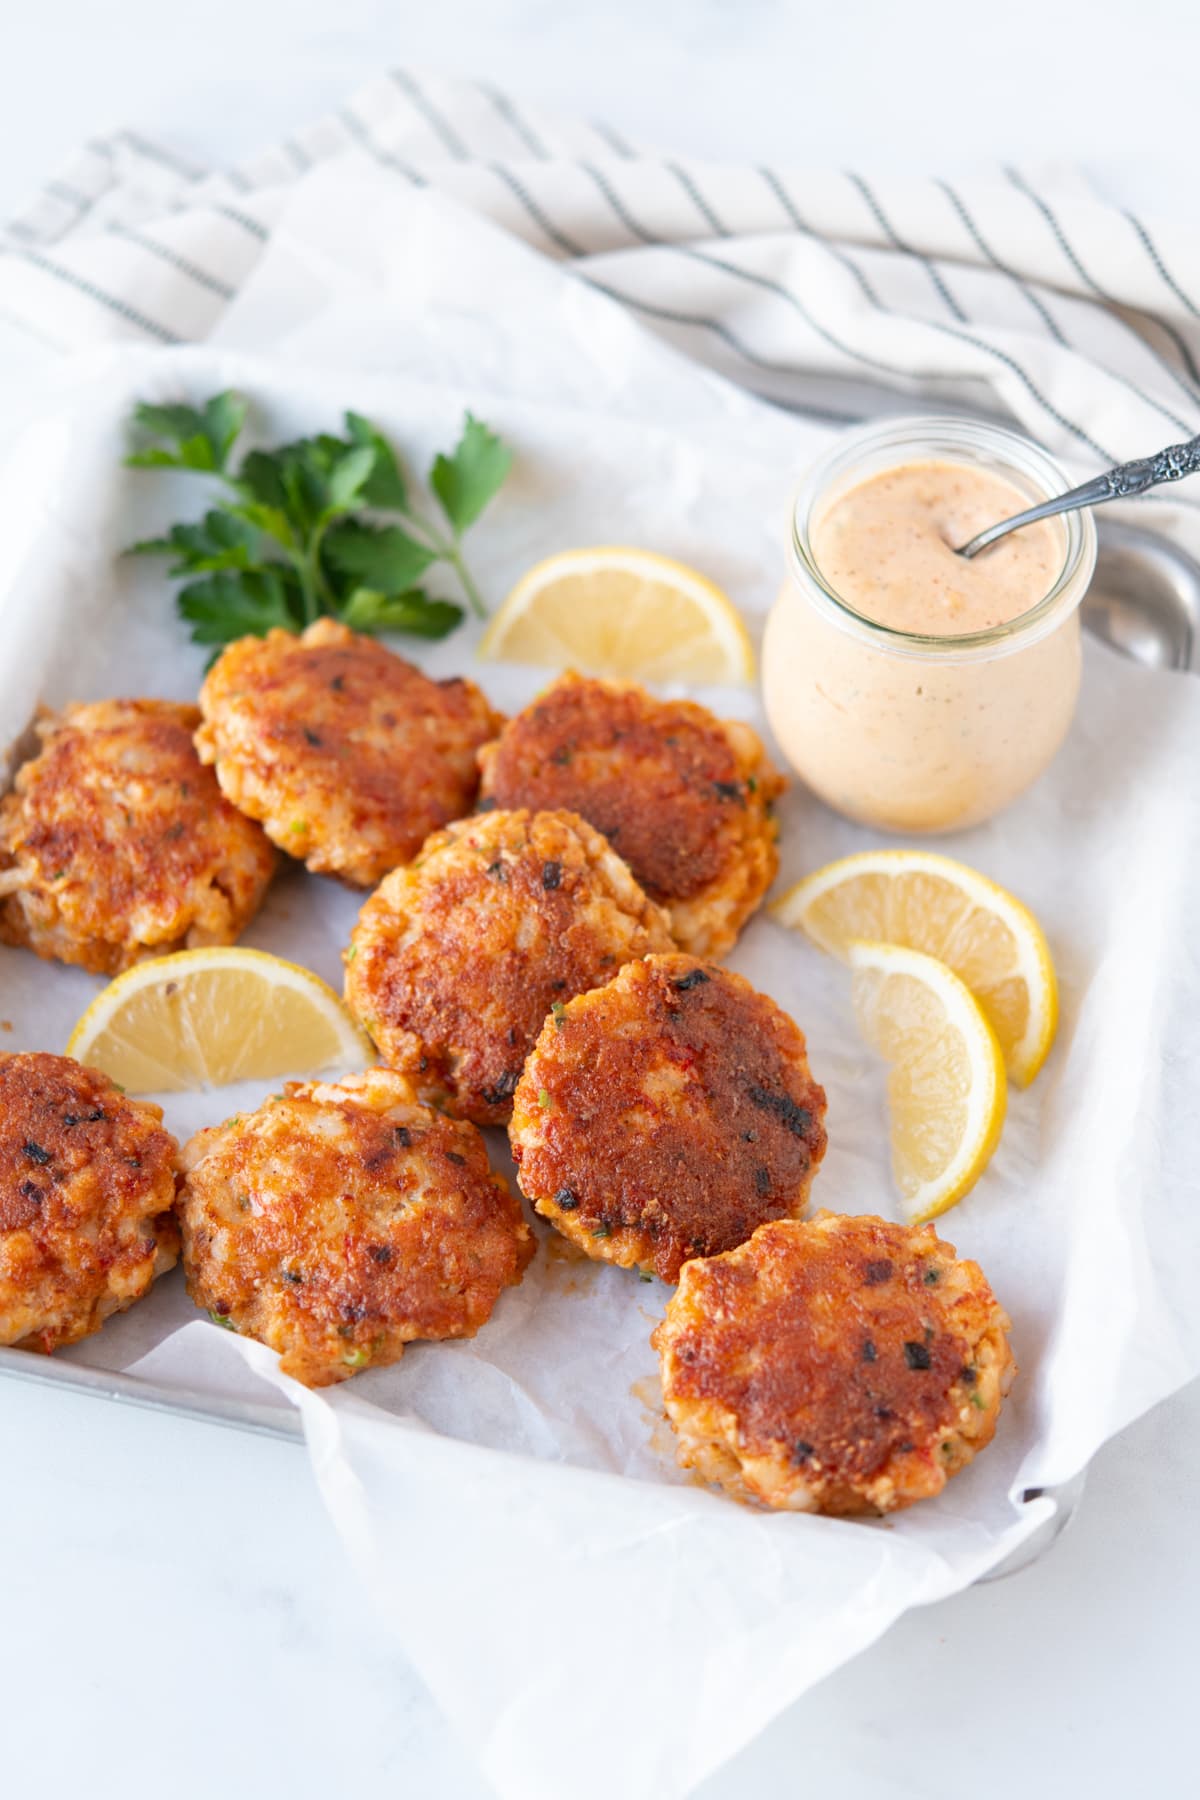 Shrimp cakes surrounded by lemons and parsley, served with remoulade